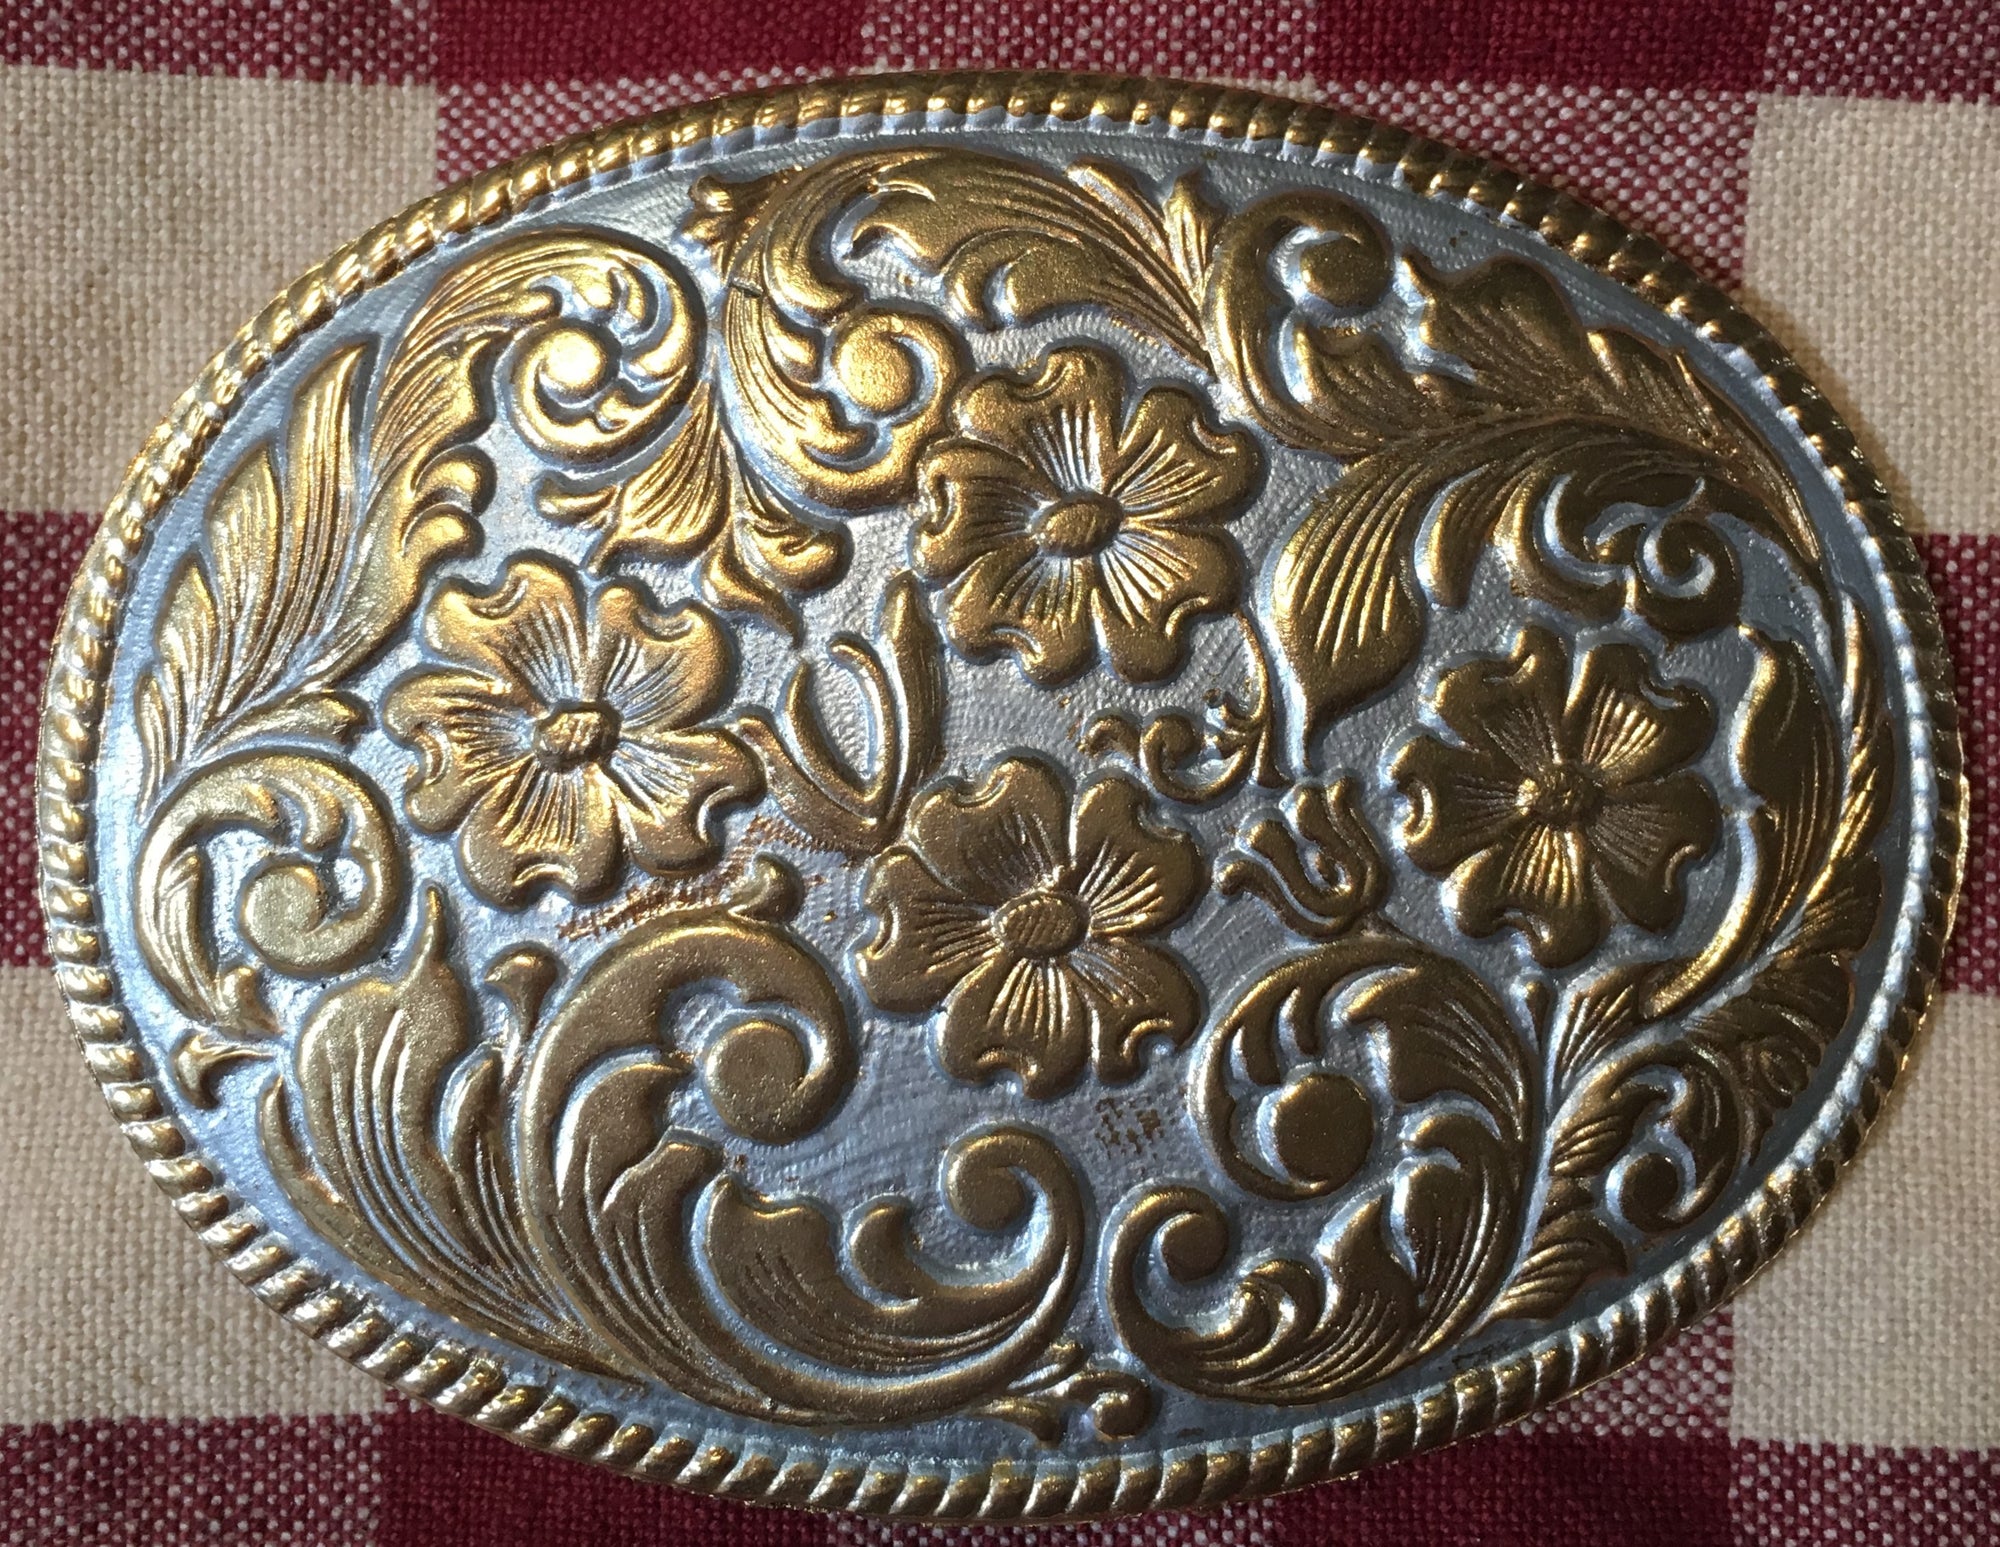 Oval Trophy Buckle Pewter with Gold Tone Flowers